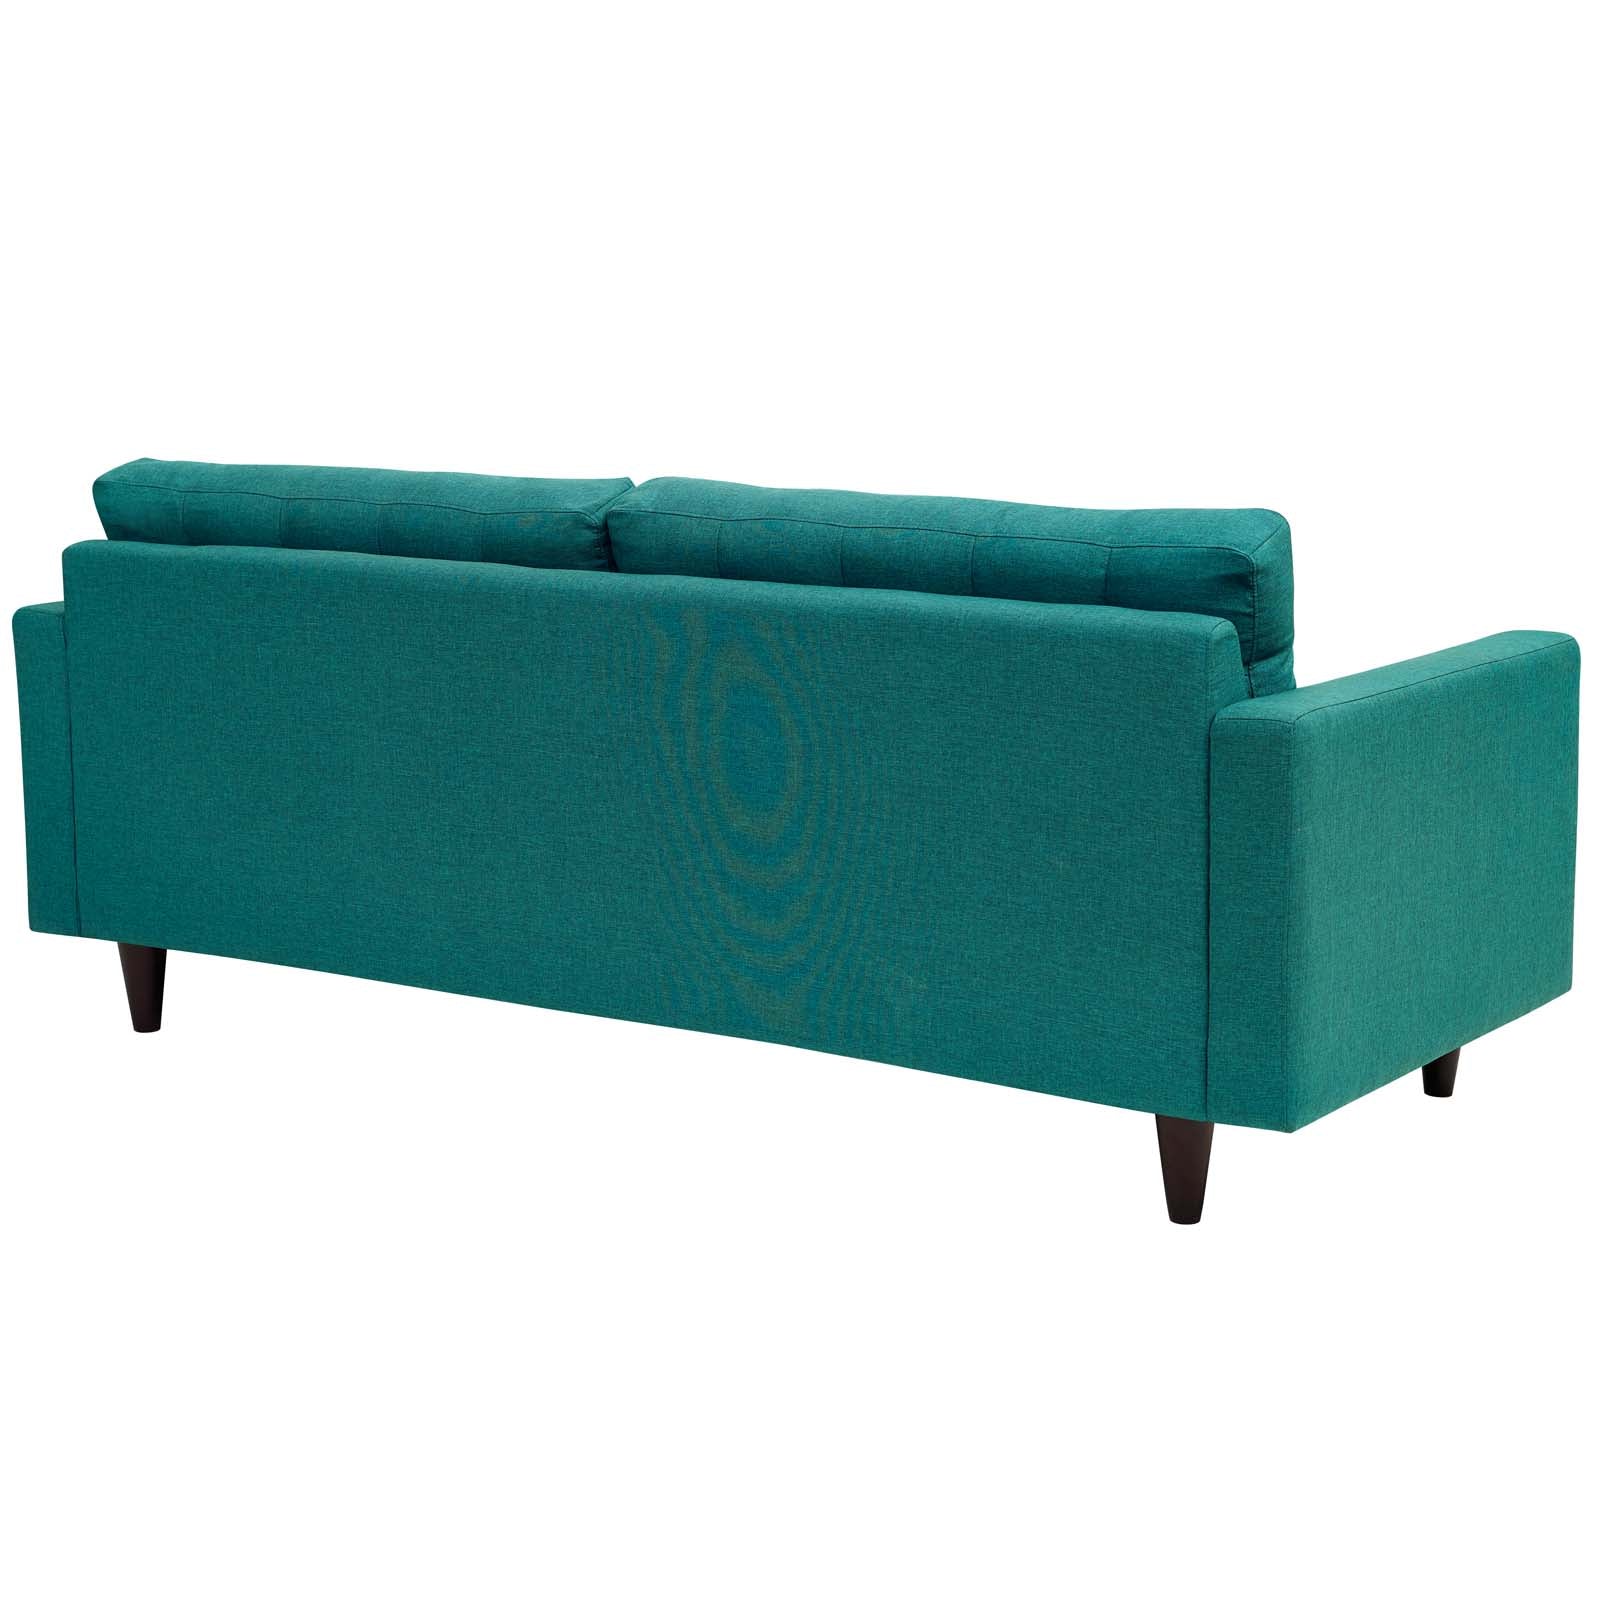 Modway Living Room Sets - Empress Sofa And Armchairs Set Of 3 Teal